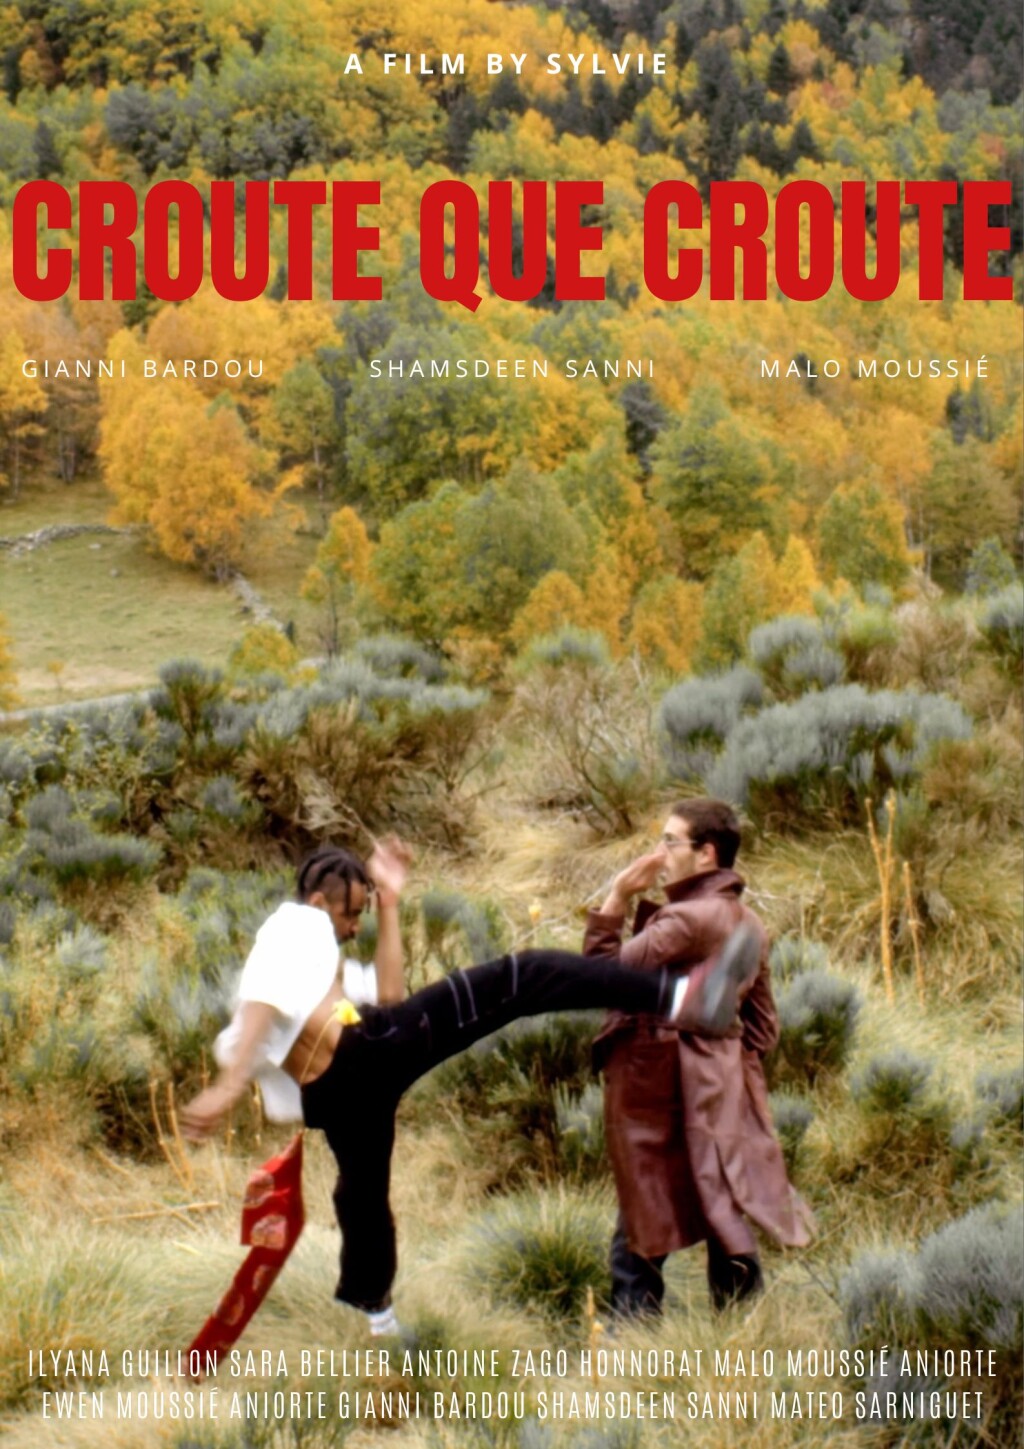 Filmposter for Croute que croute